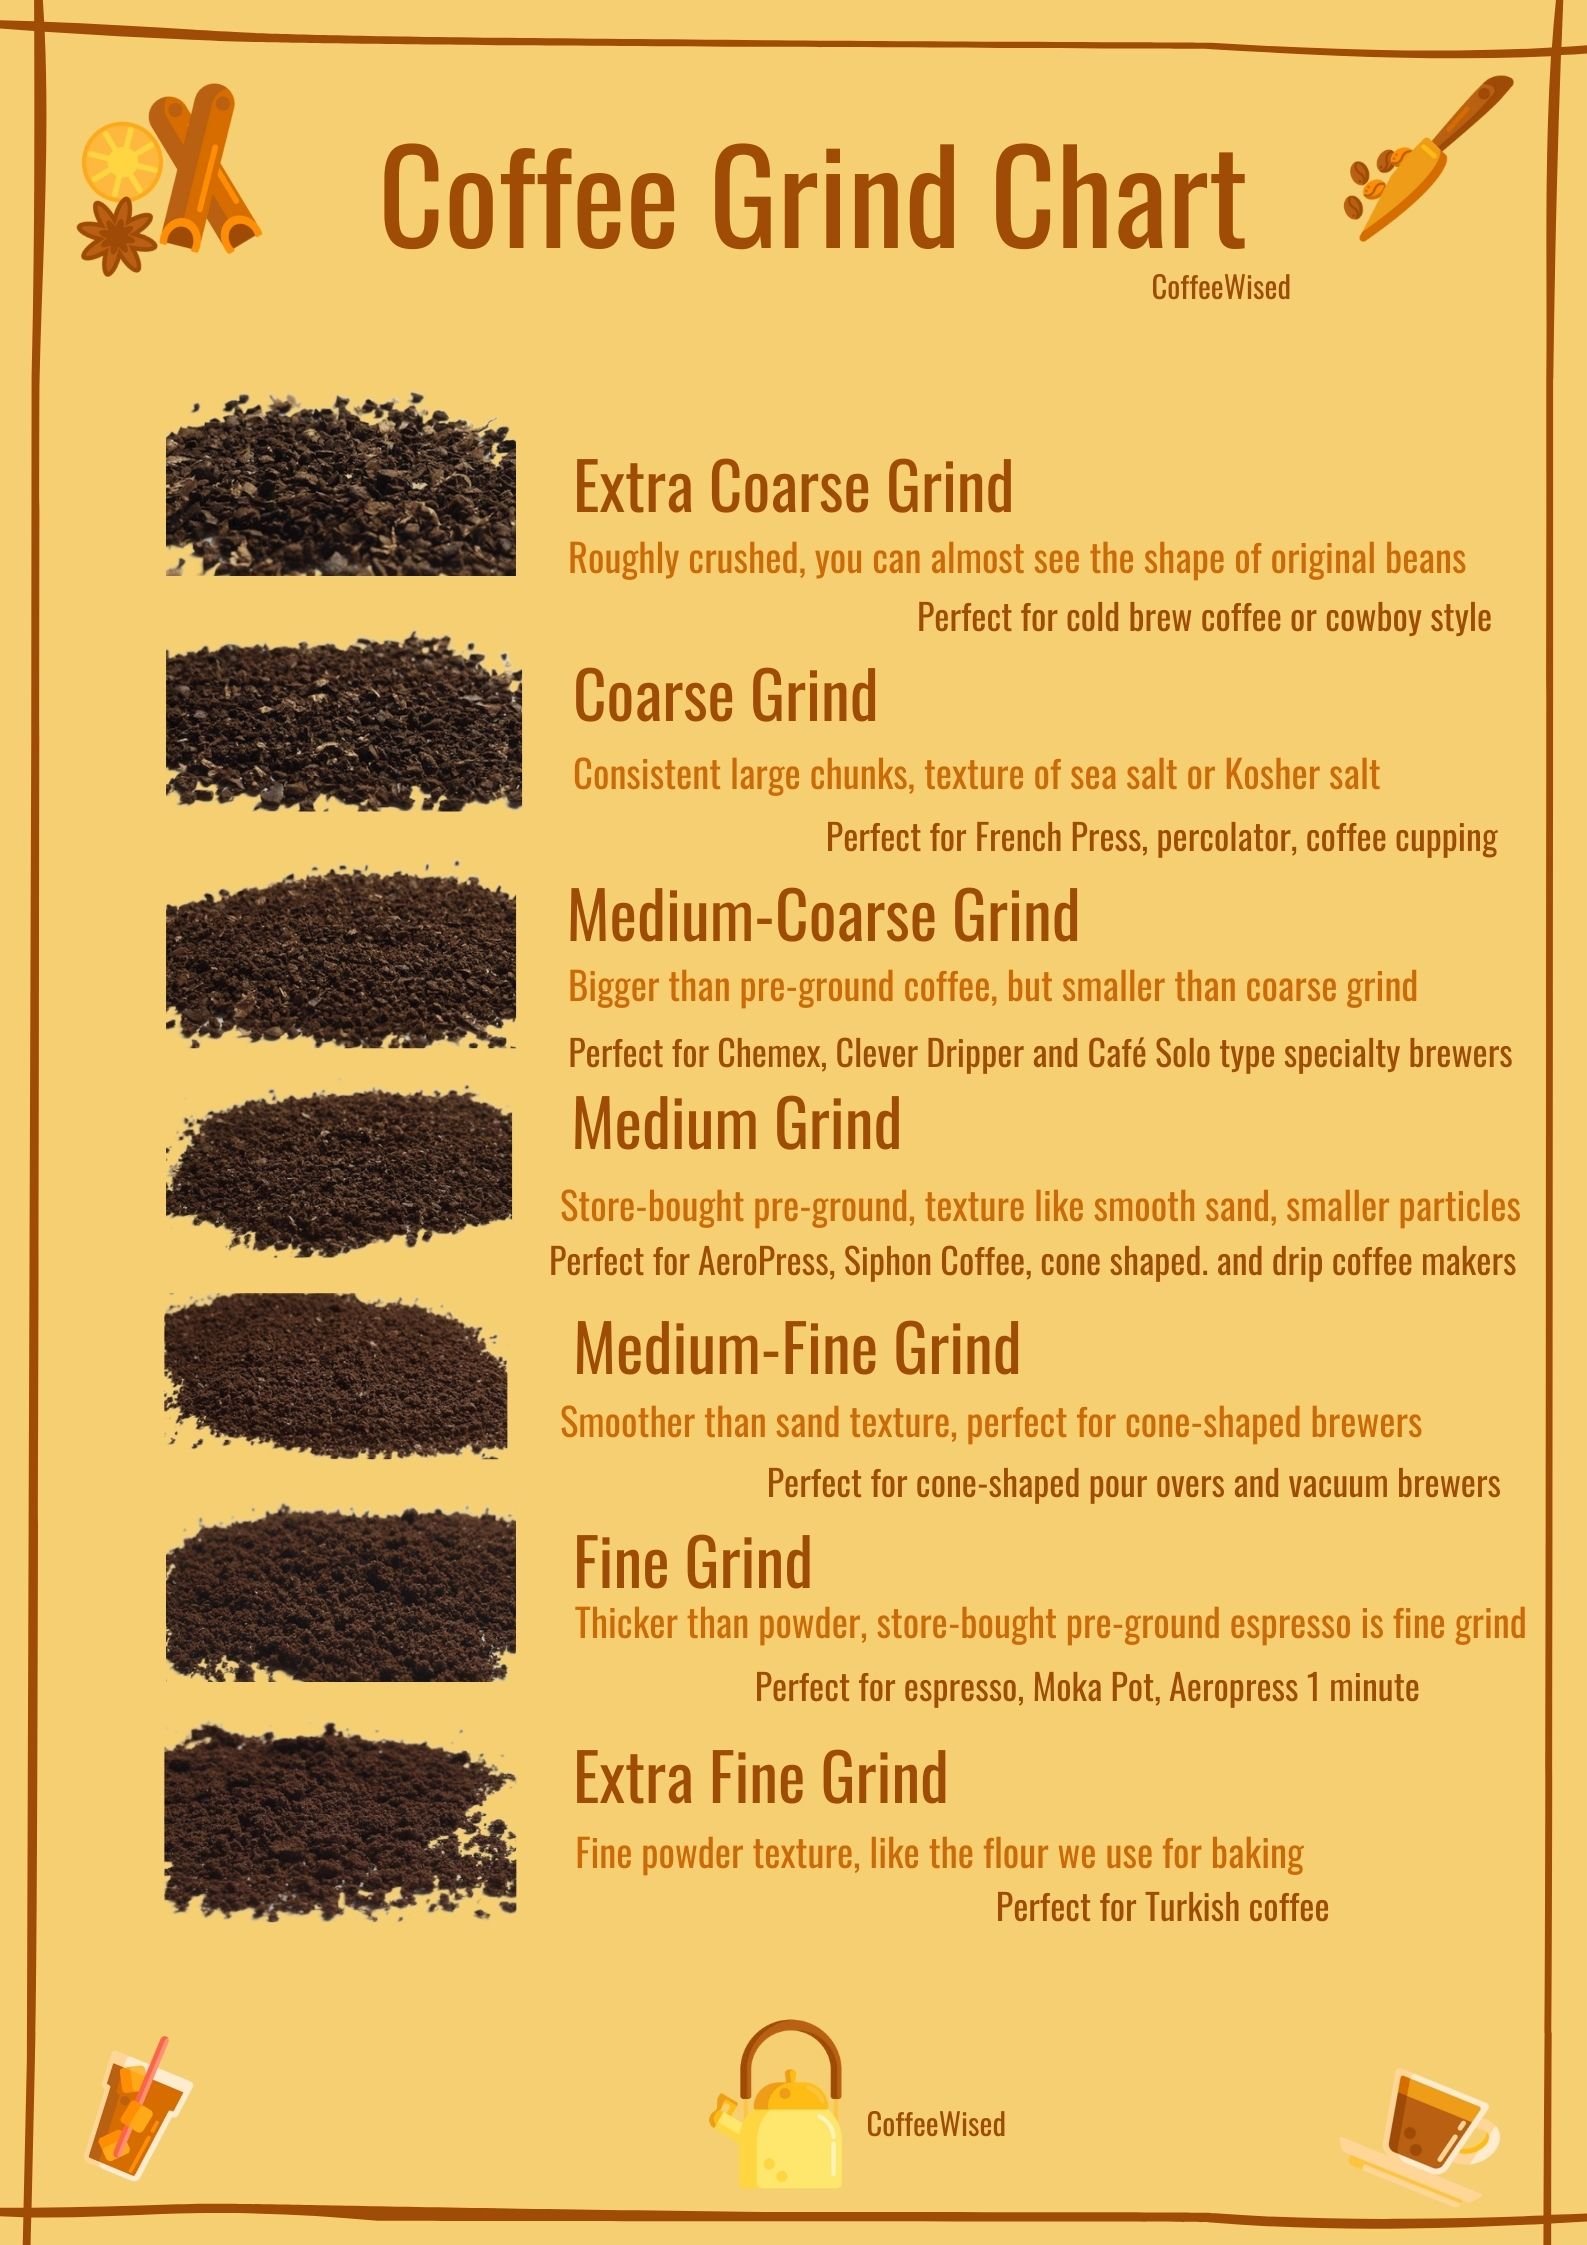 Coffee grind size chart with details and examples